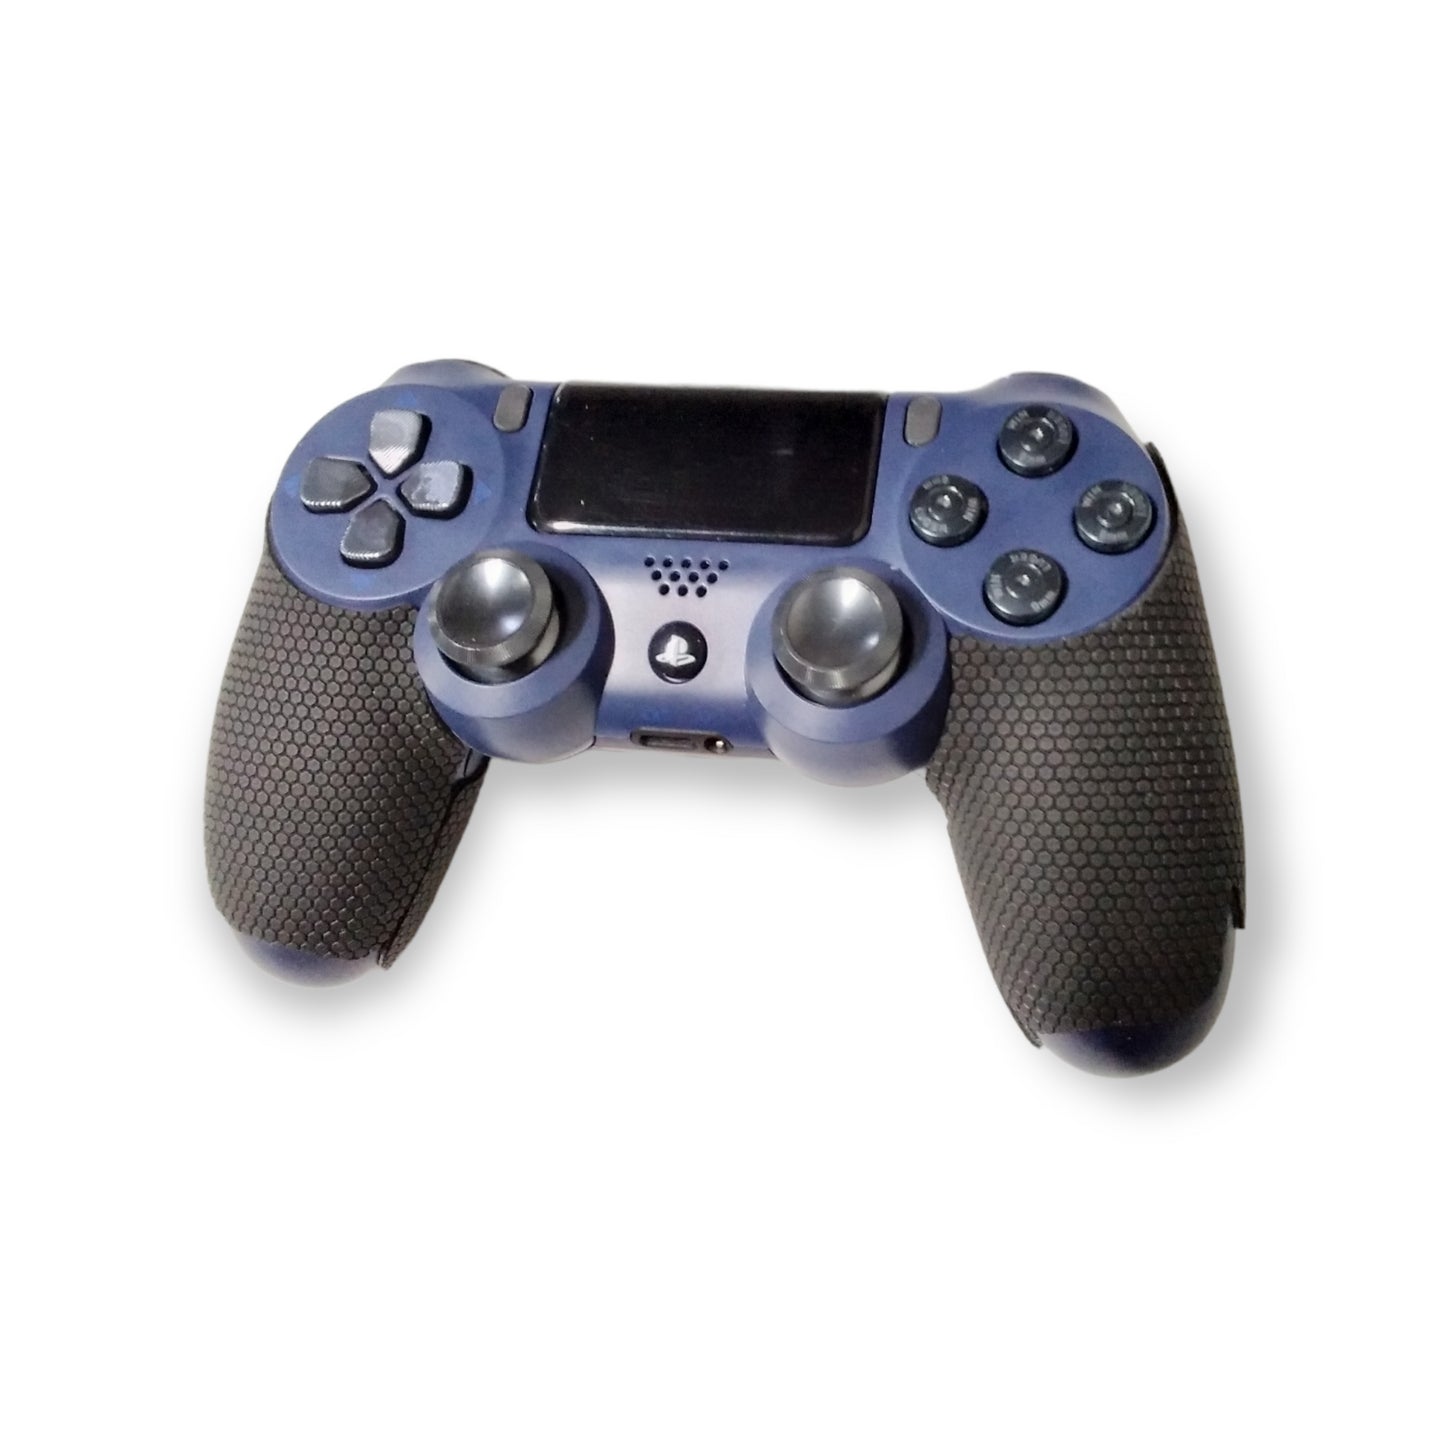 Modified PlayStation 4 Controller - Black/Blue